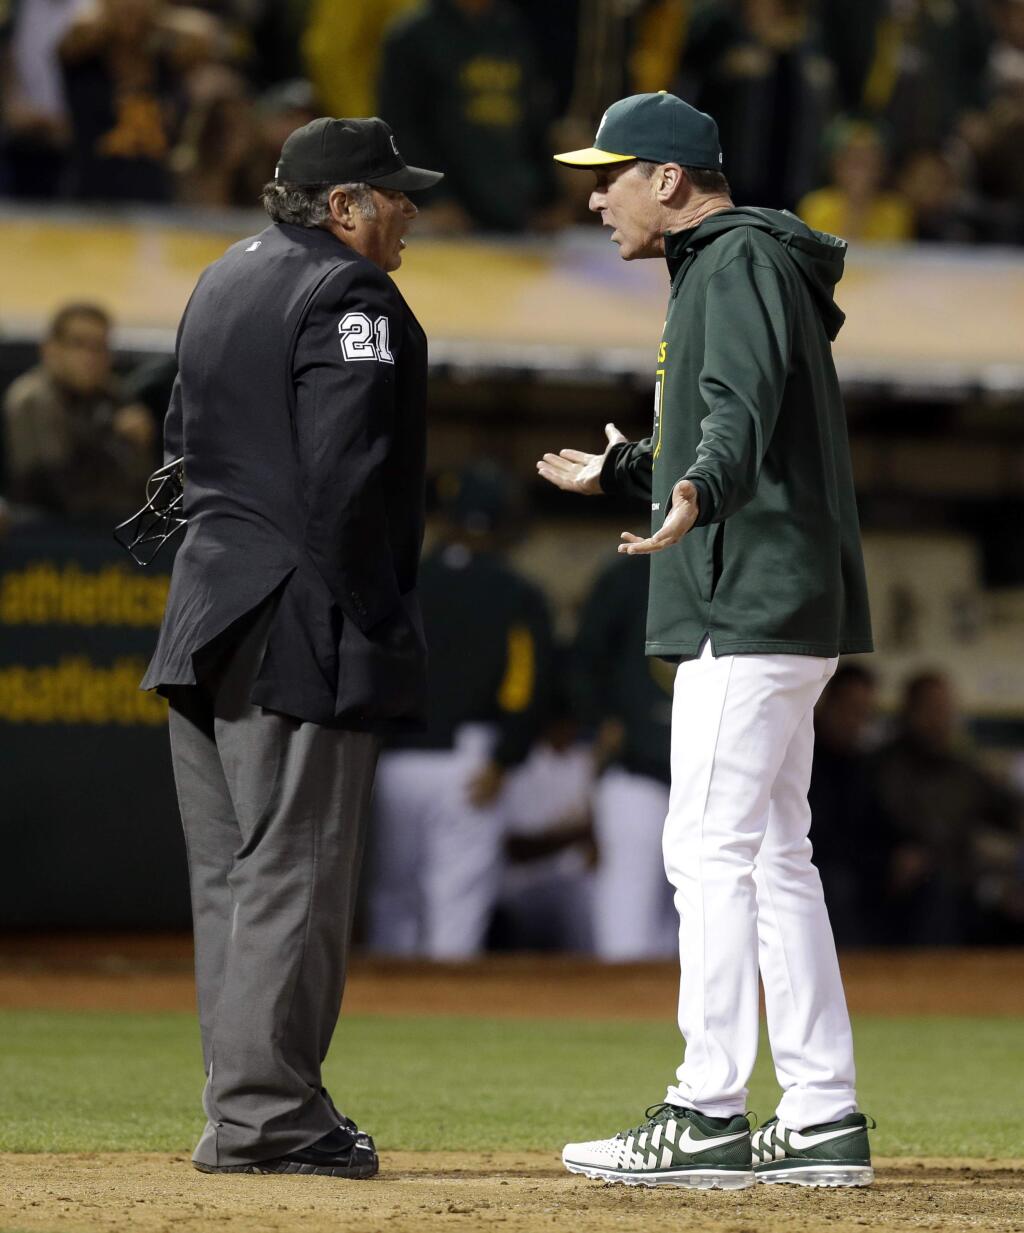 Oakland Athletics manager Bob Melvin, right, argues with home plate umpire Hunter Wendelstedt during the fifth inning of a baseball game against the Toronto Blue Jays Wednesday, July 22, 2015, in Oakland, Calif. Melvin was ejected. (AP Photo/Ben Margot)